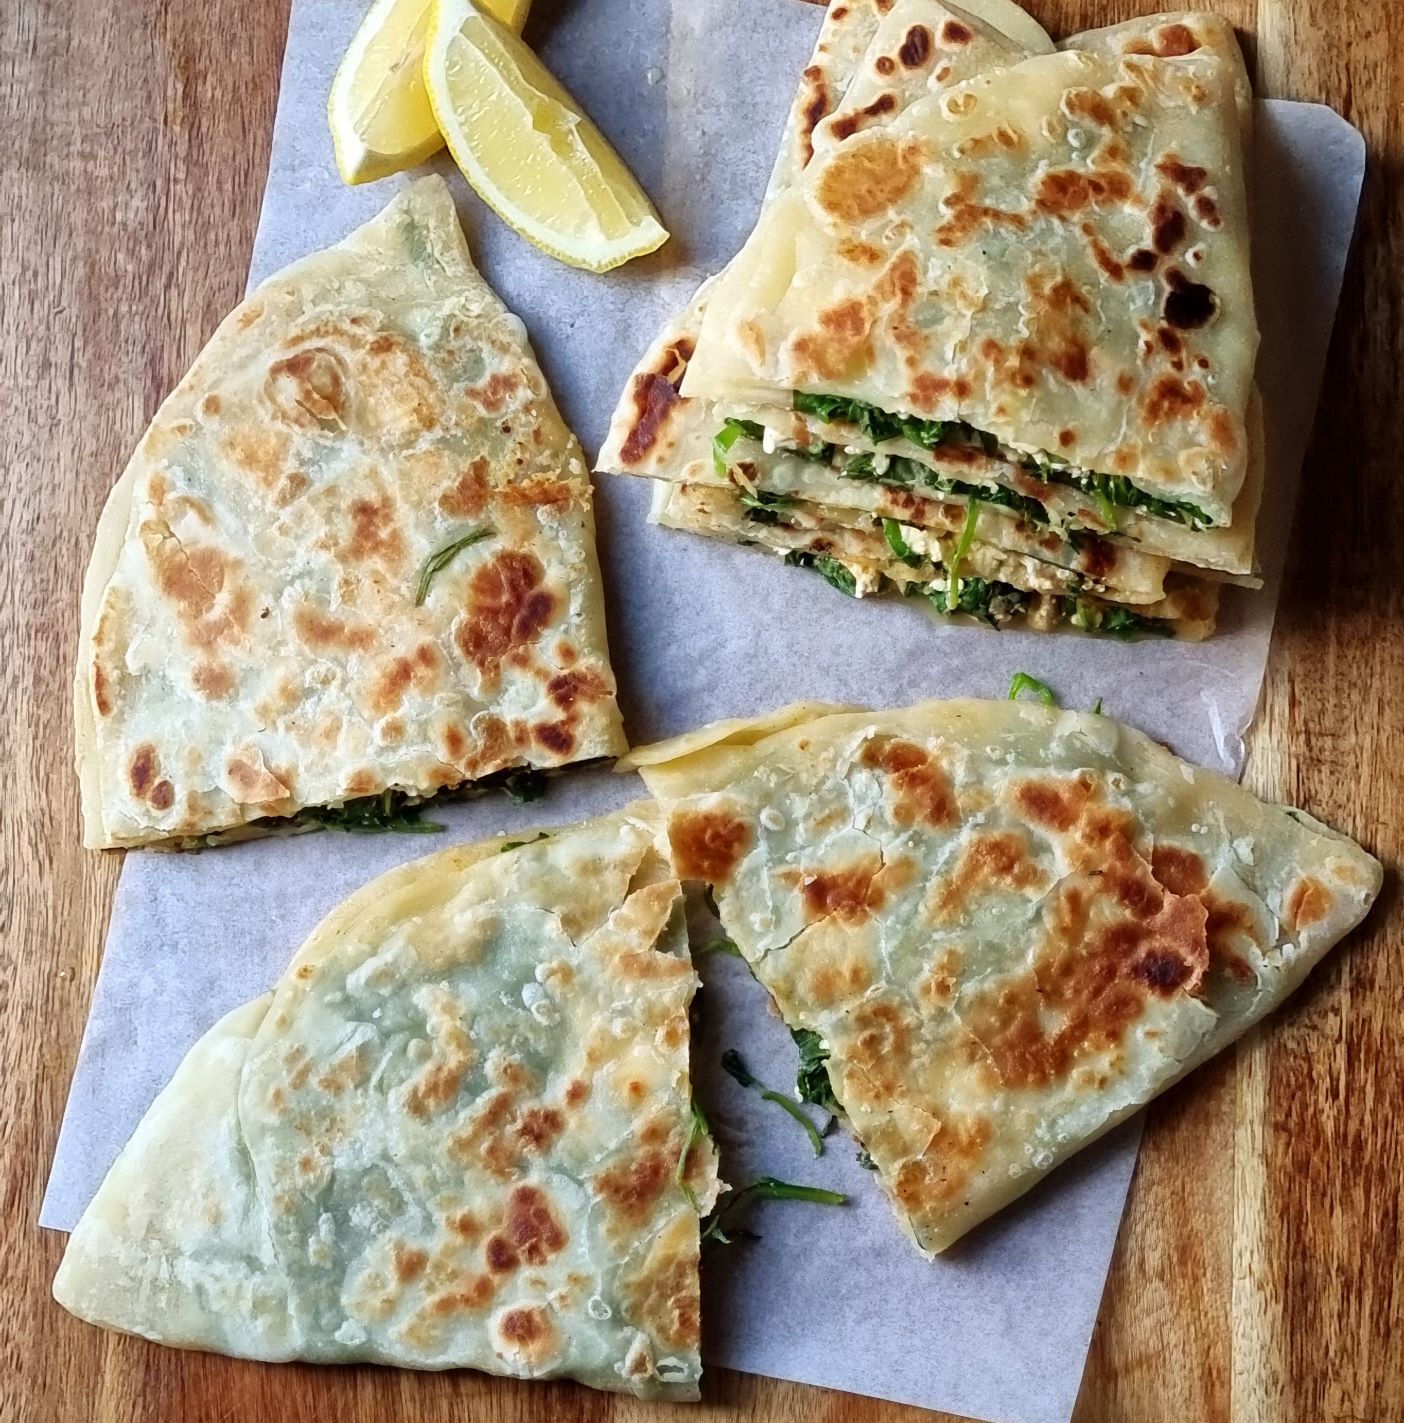 Spinach & Cheese Gozleme